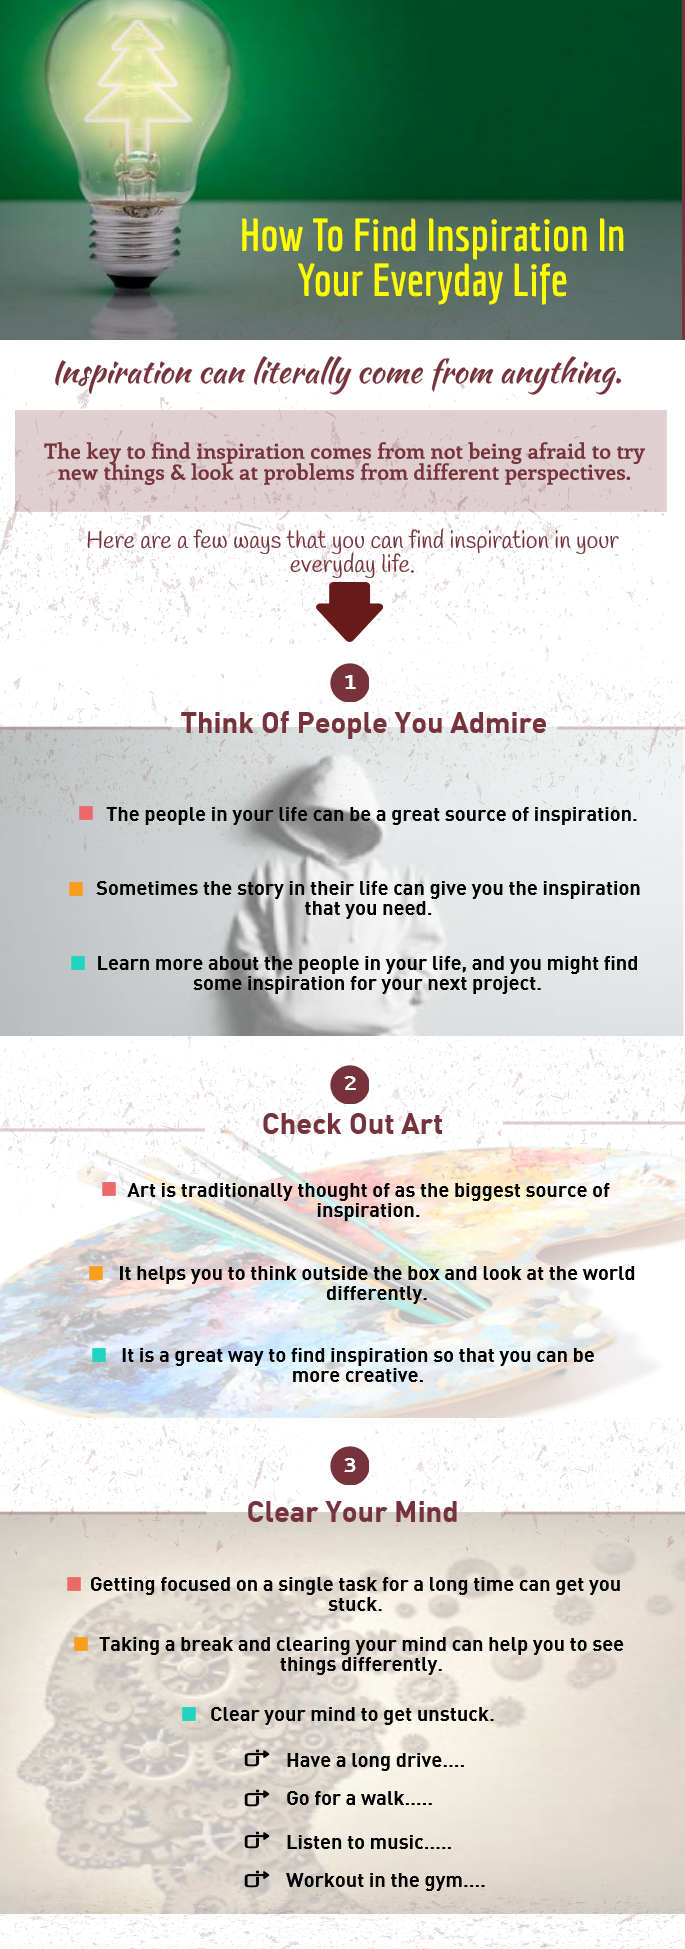 How To Find Inspiration In Your Everyday Life